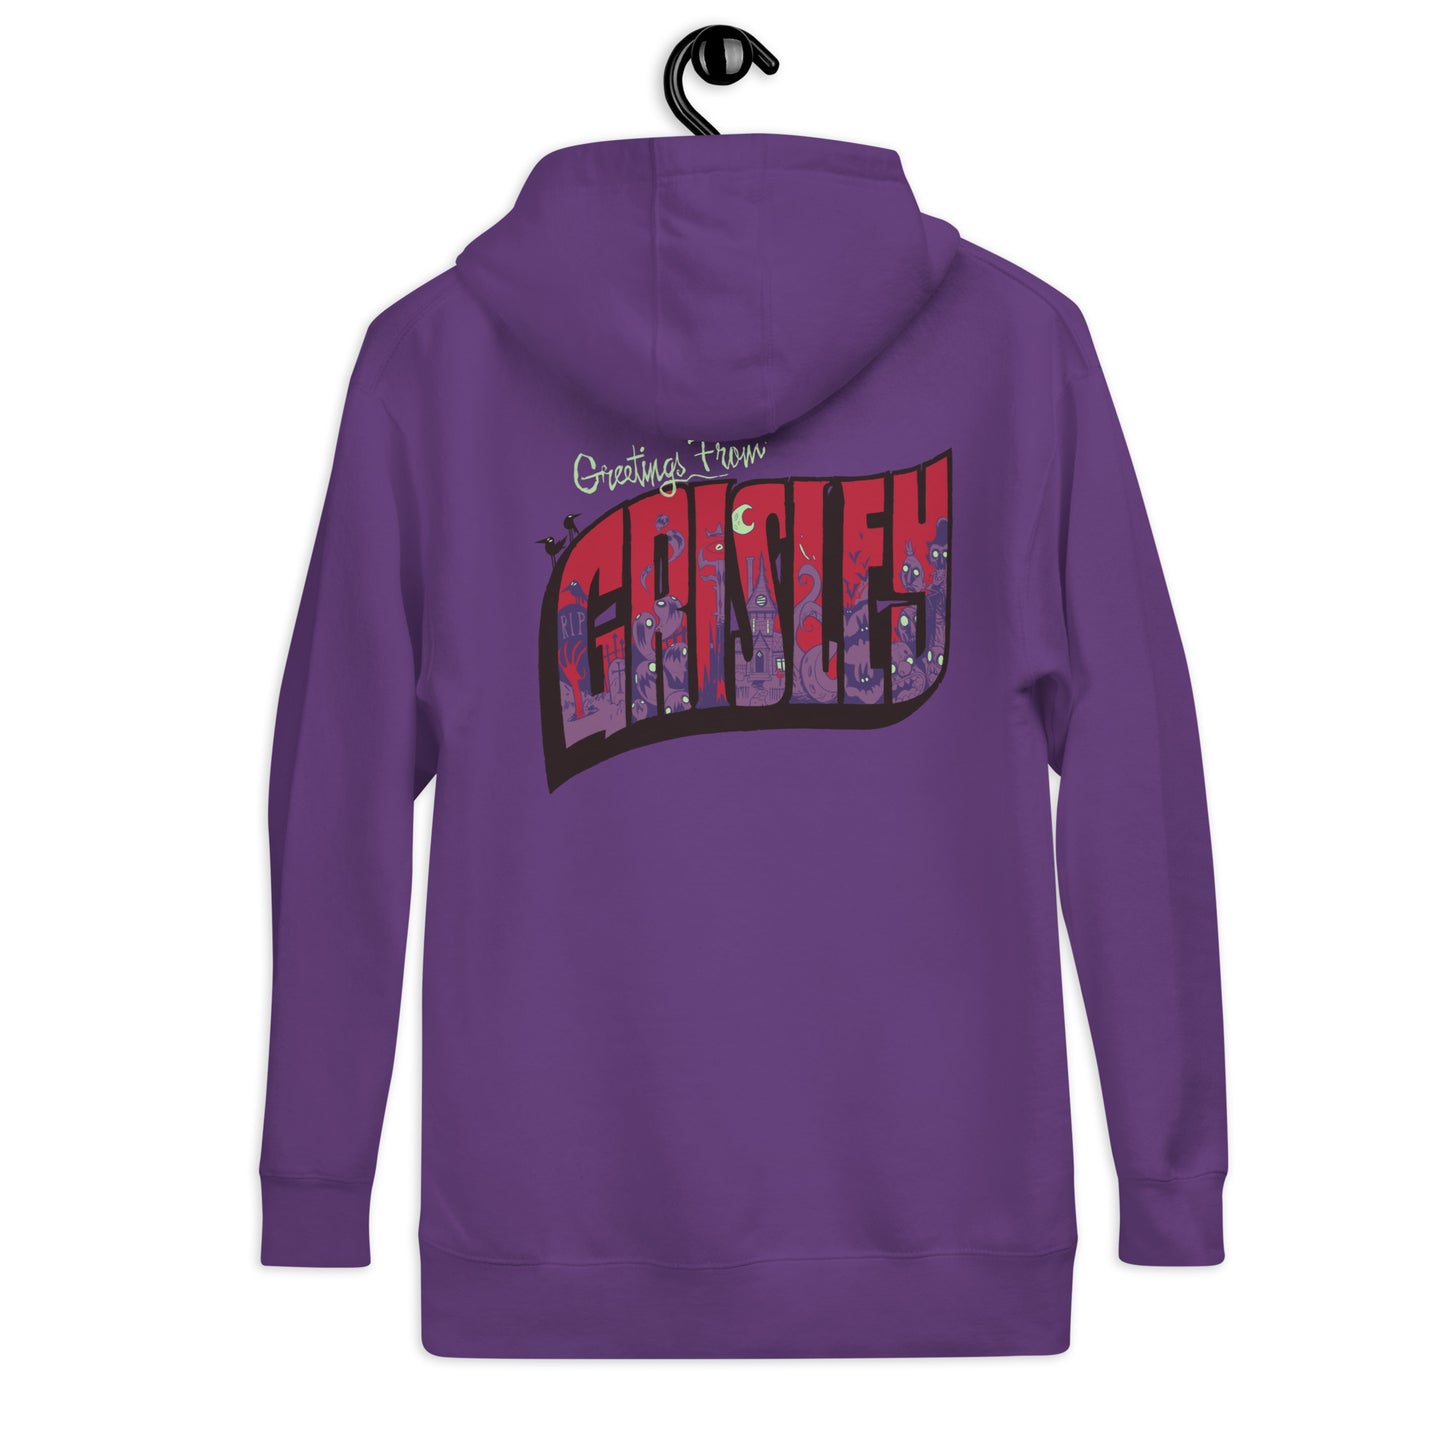 Finito on Grave Unisex Hoodie